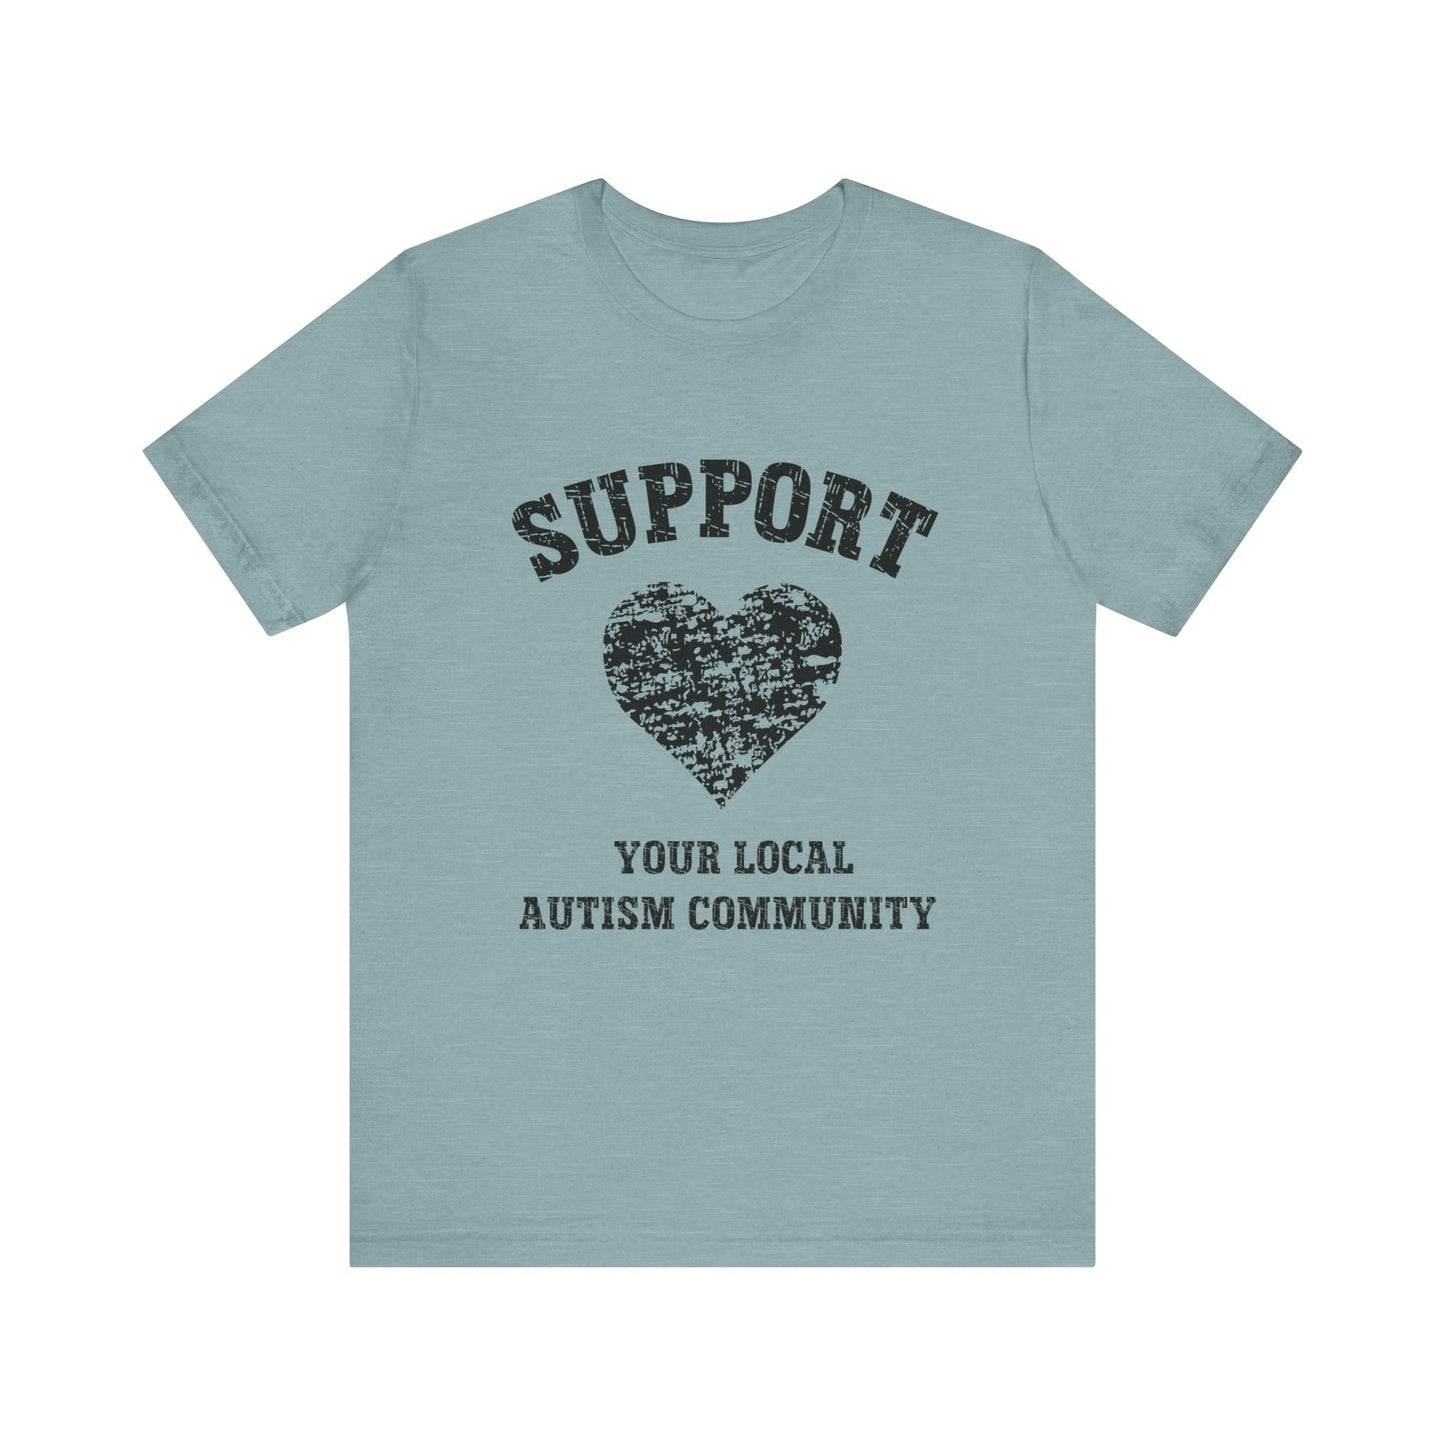 Support Your Local Autism Community  Autism Awareness Adult Unisex Short Sleeve Tee